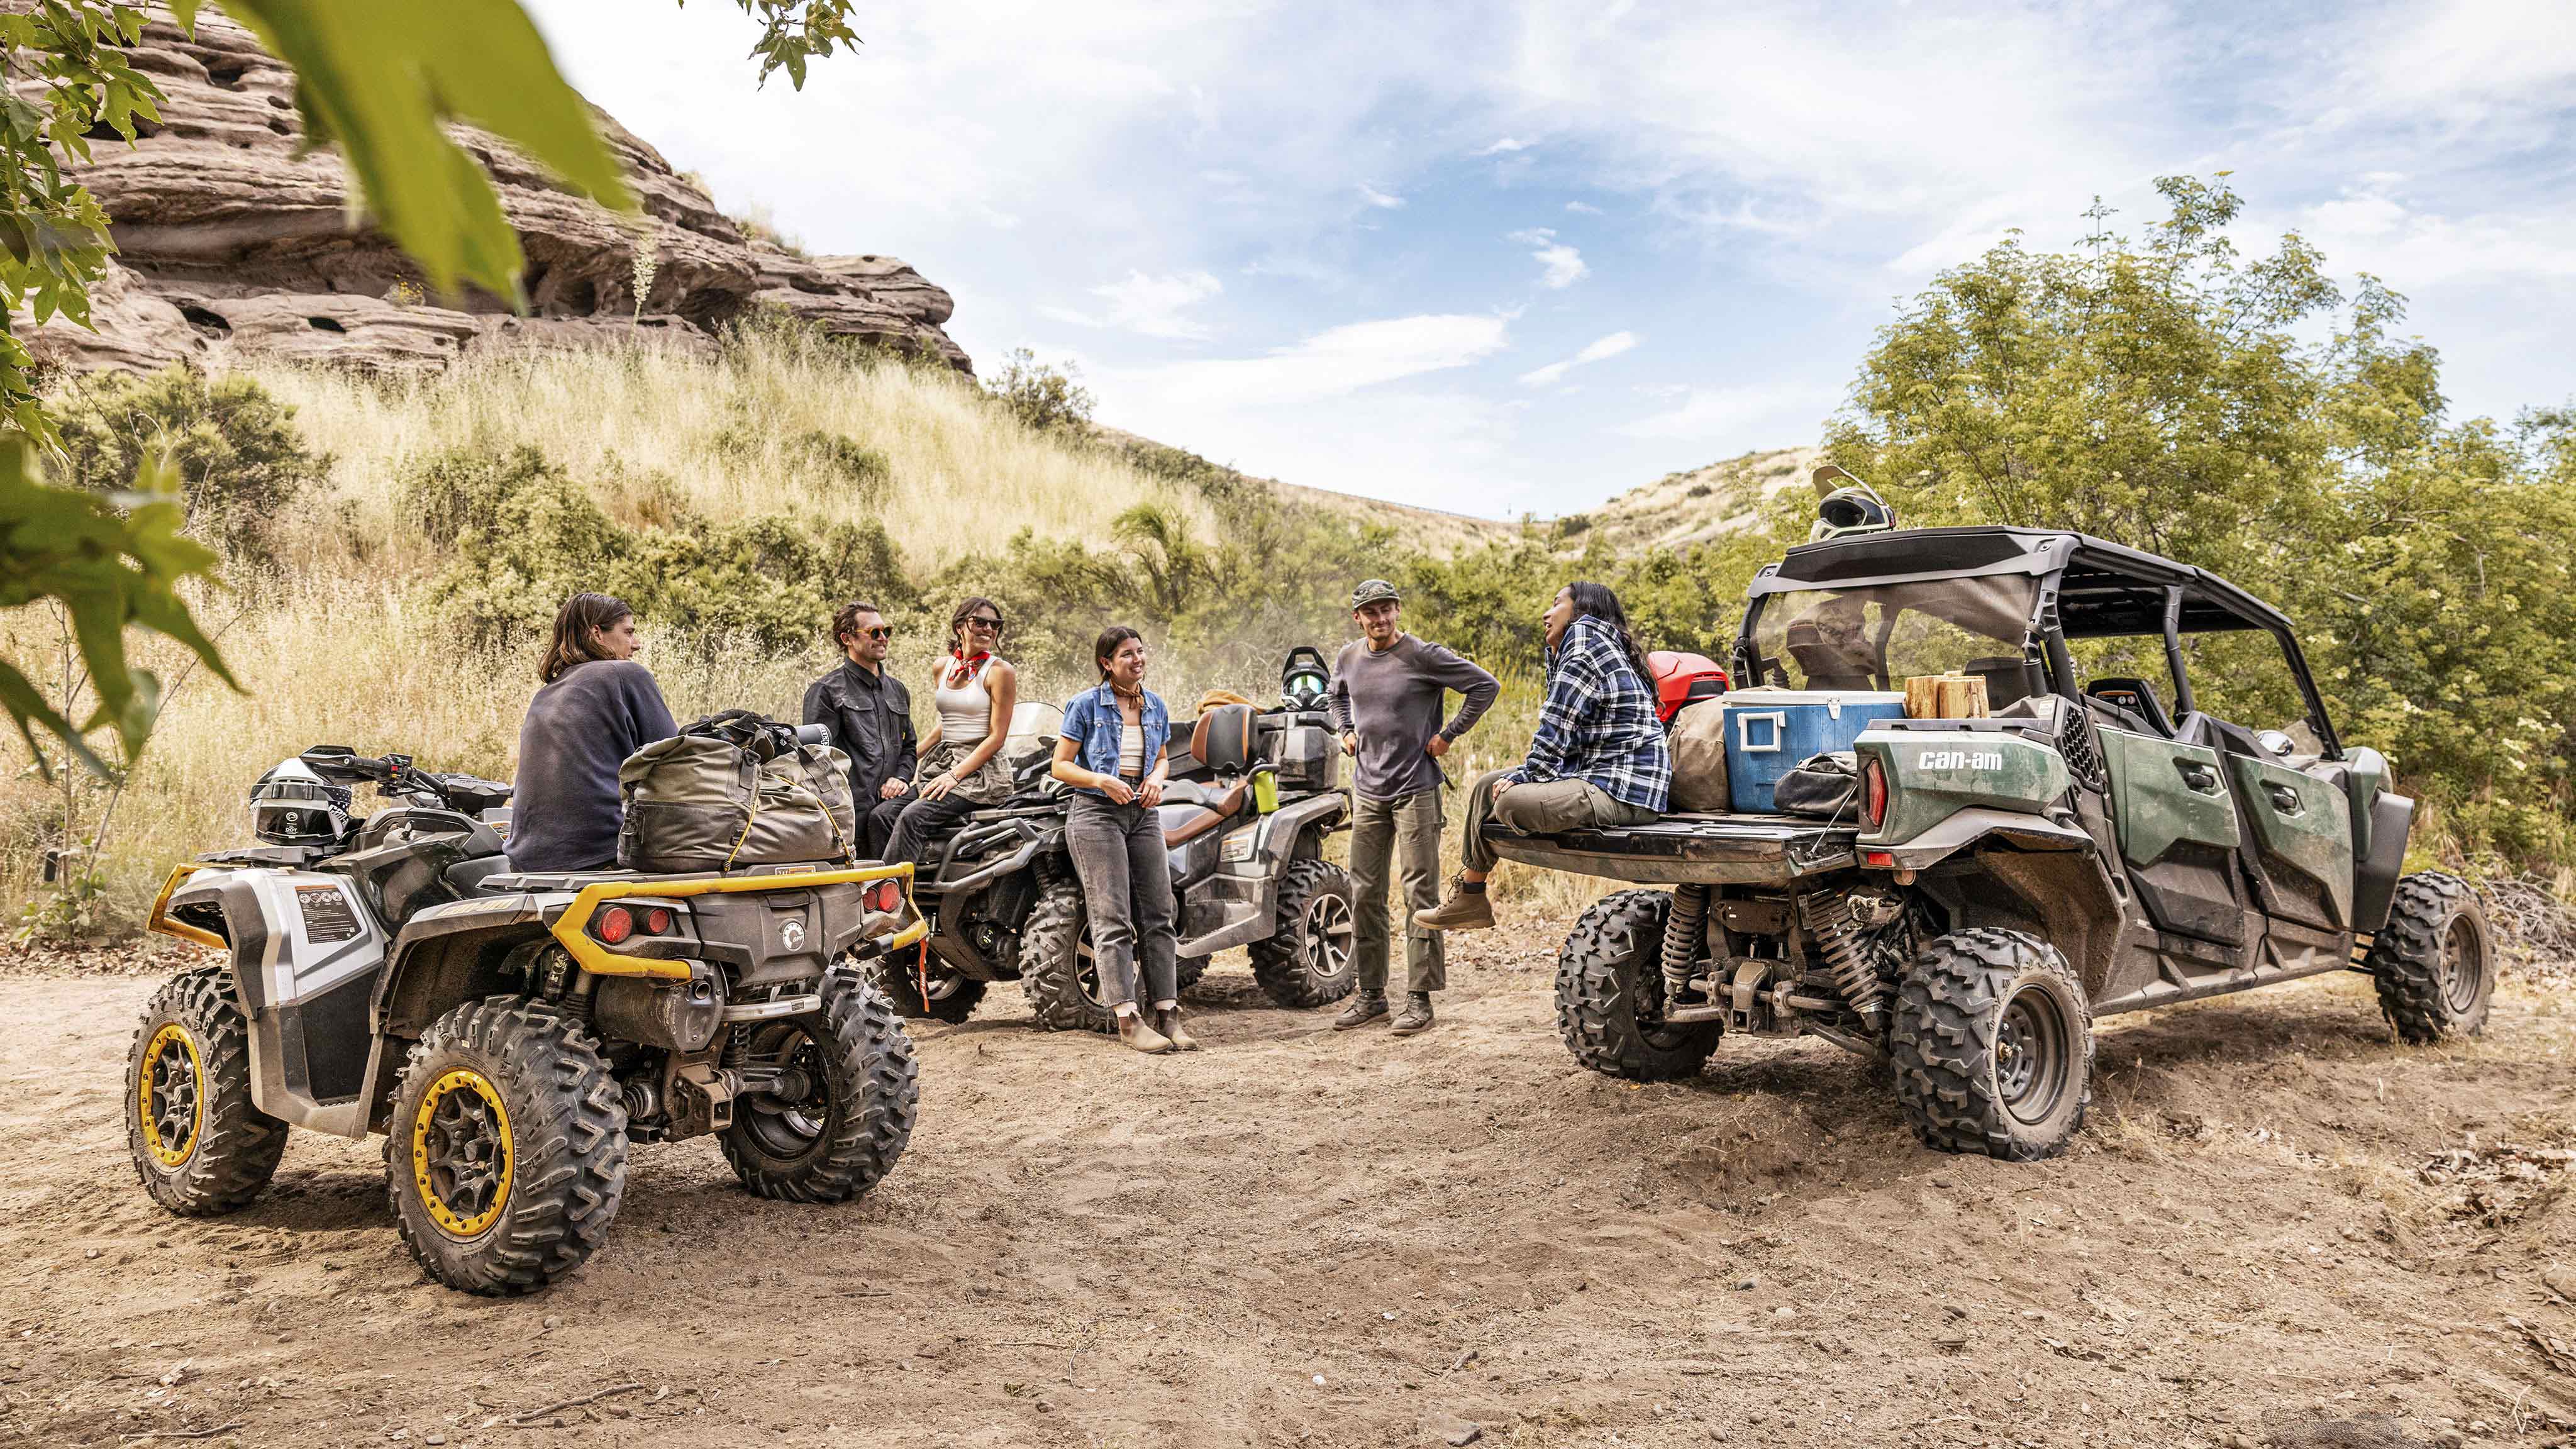 A group of riders taking a break in the desert next to their Can-Am ATV and SxS vehicles